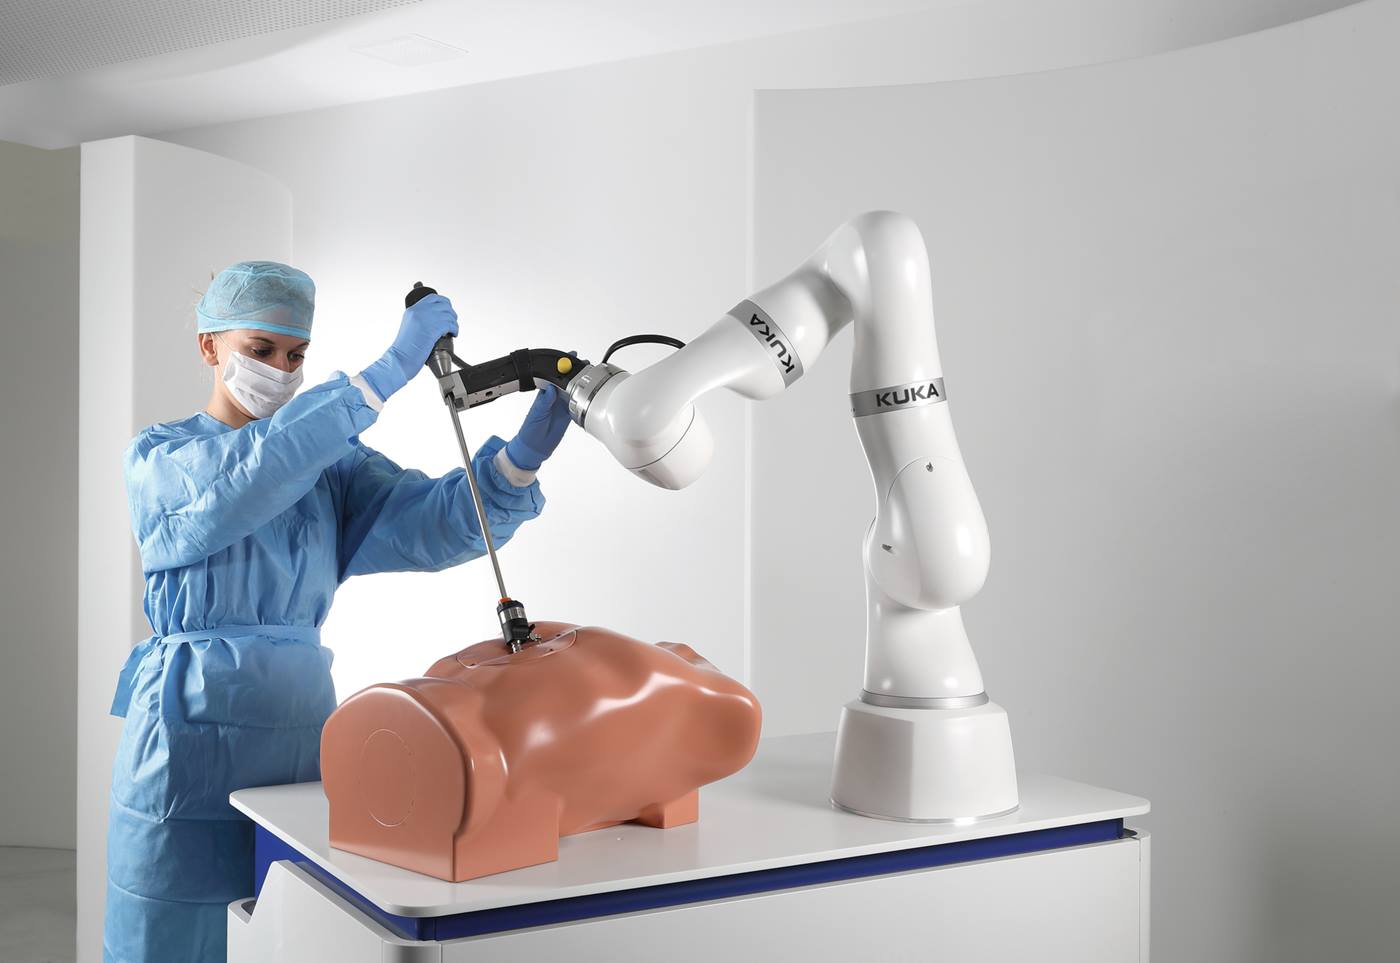 KUKA Lightweight Robot LBR Med can  bie integrated into medical products